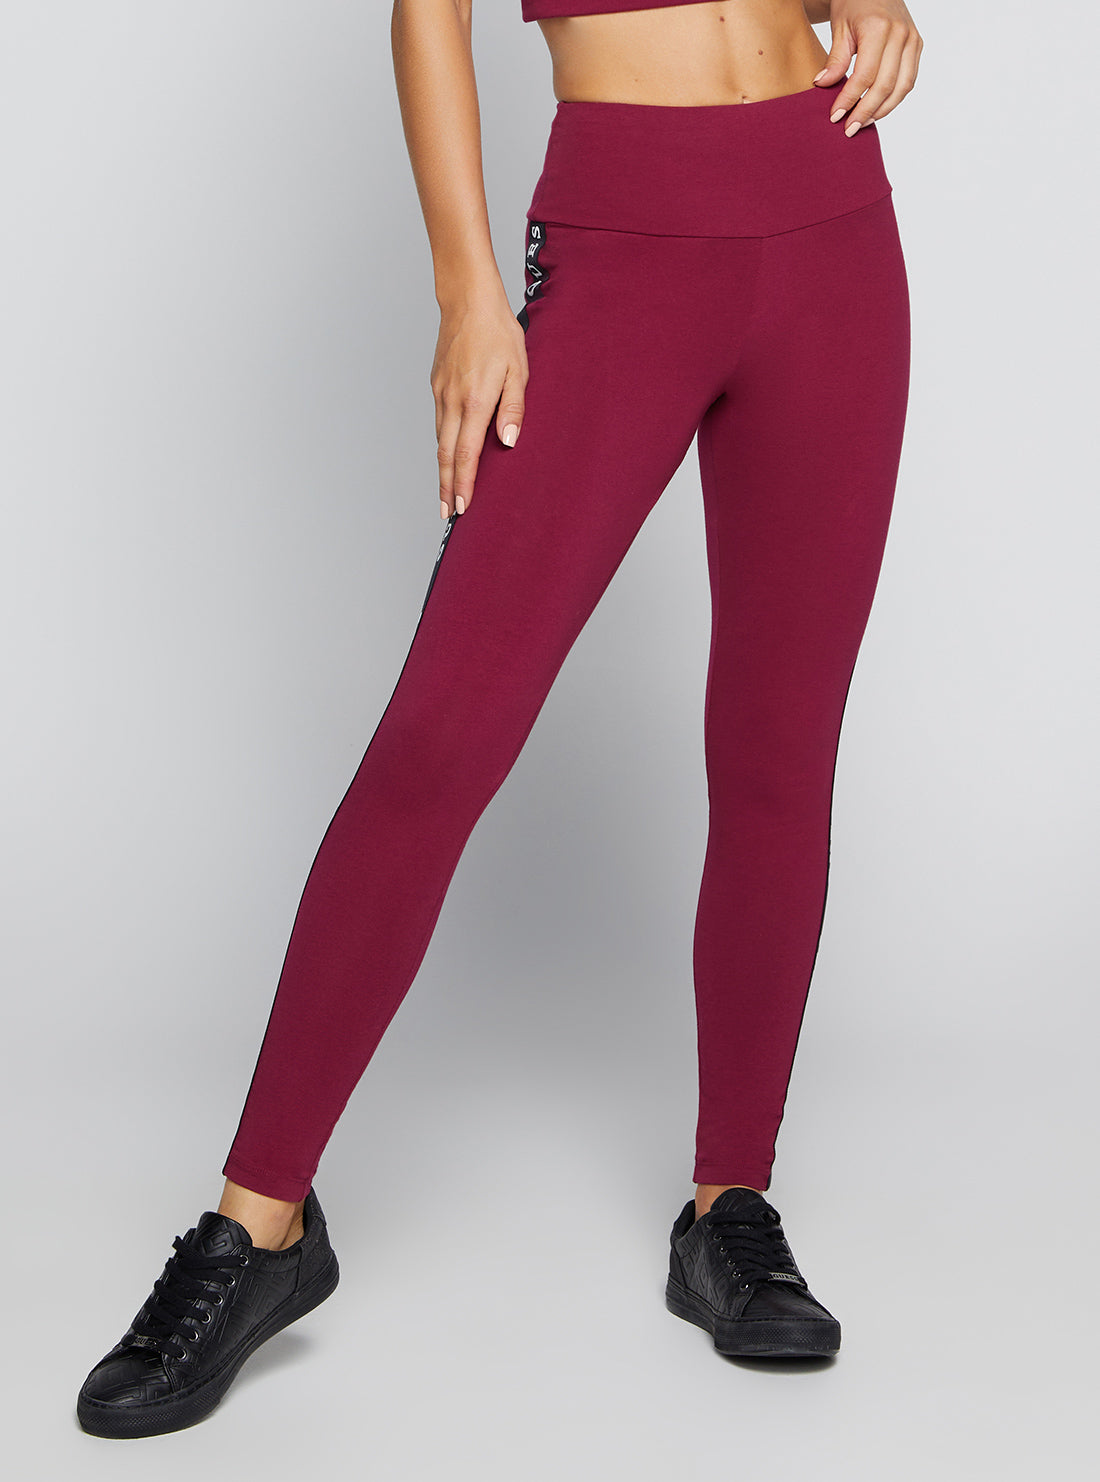 GUESS Women's Eco Purple Aline Logo Active Leggings V2YB14KABR0 Front View